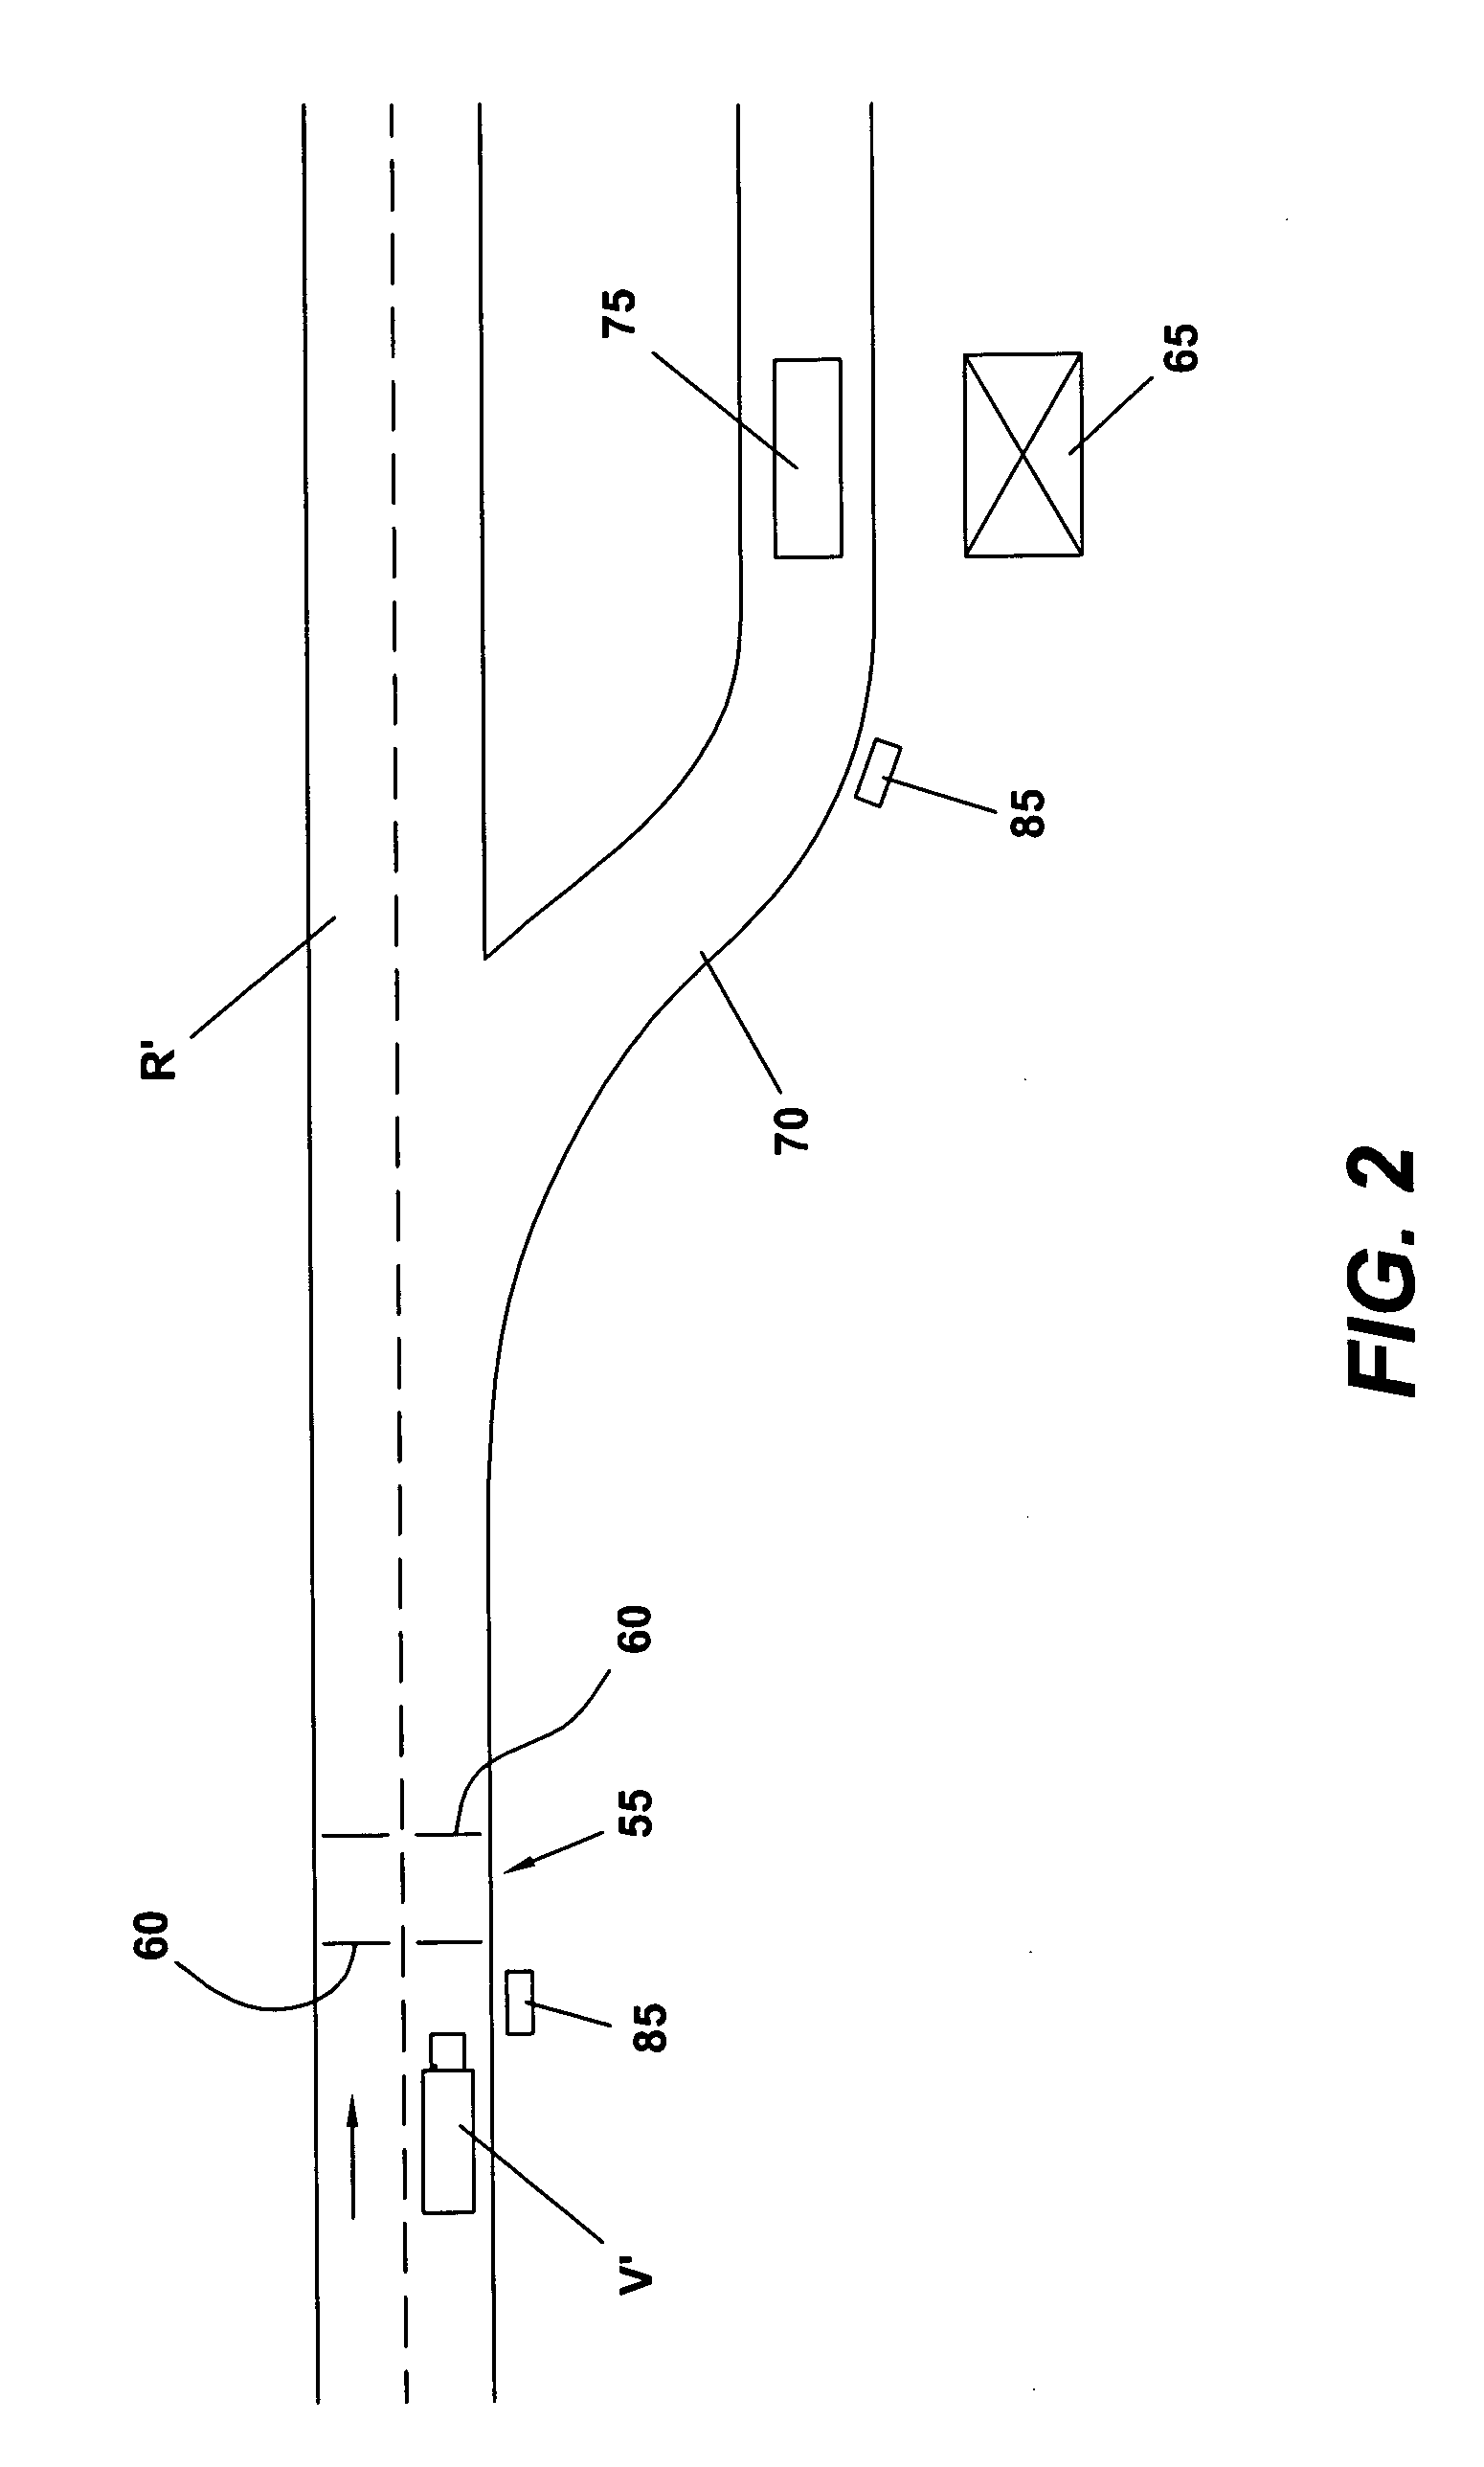 Weigh-in-motion system with auto-calibration